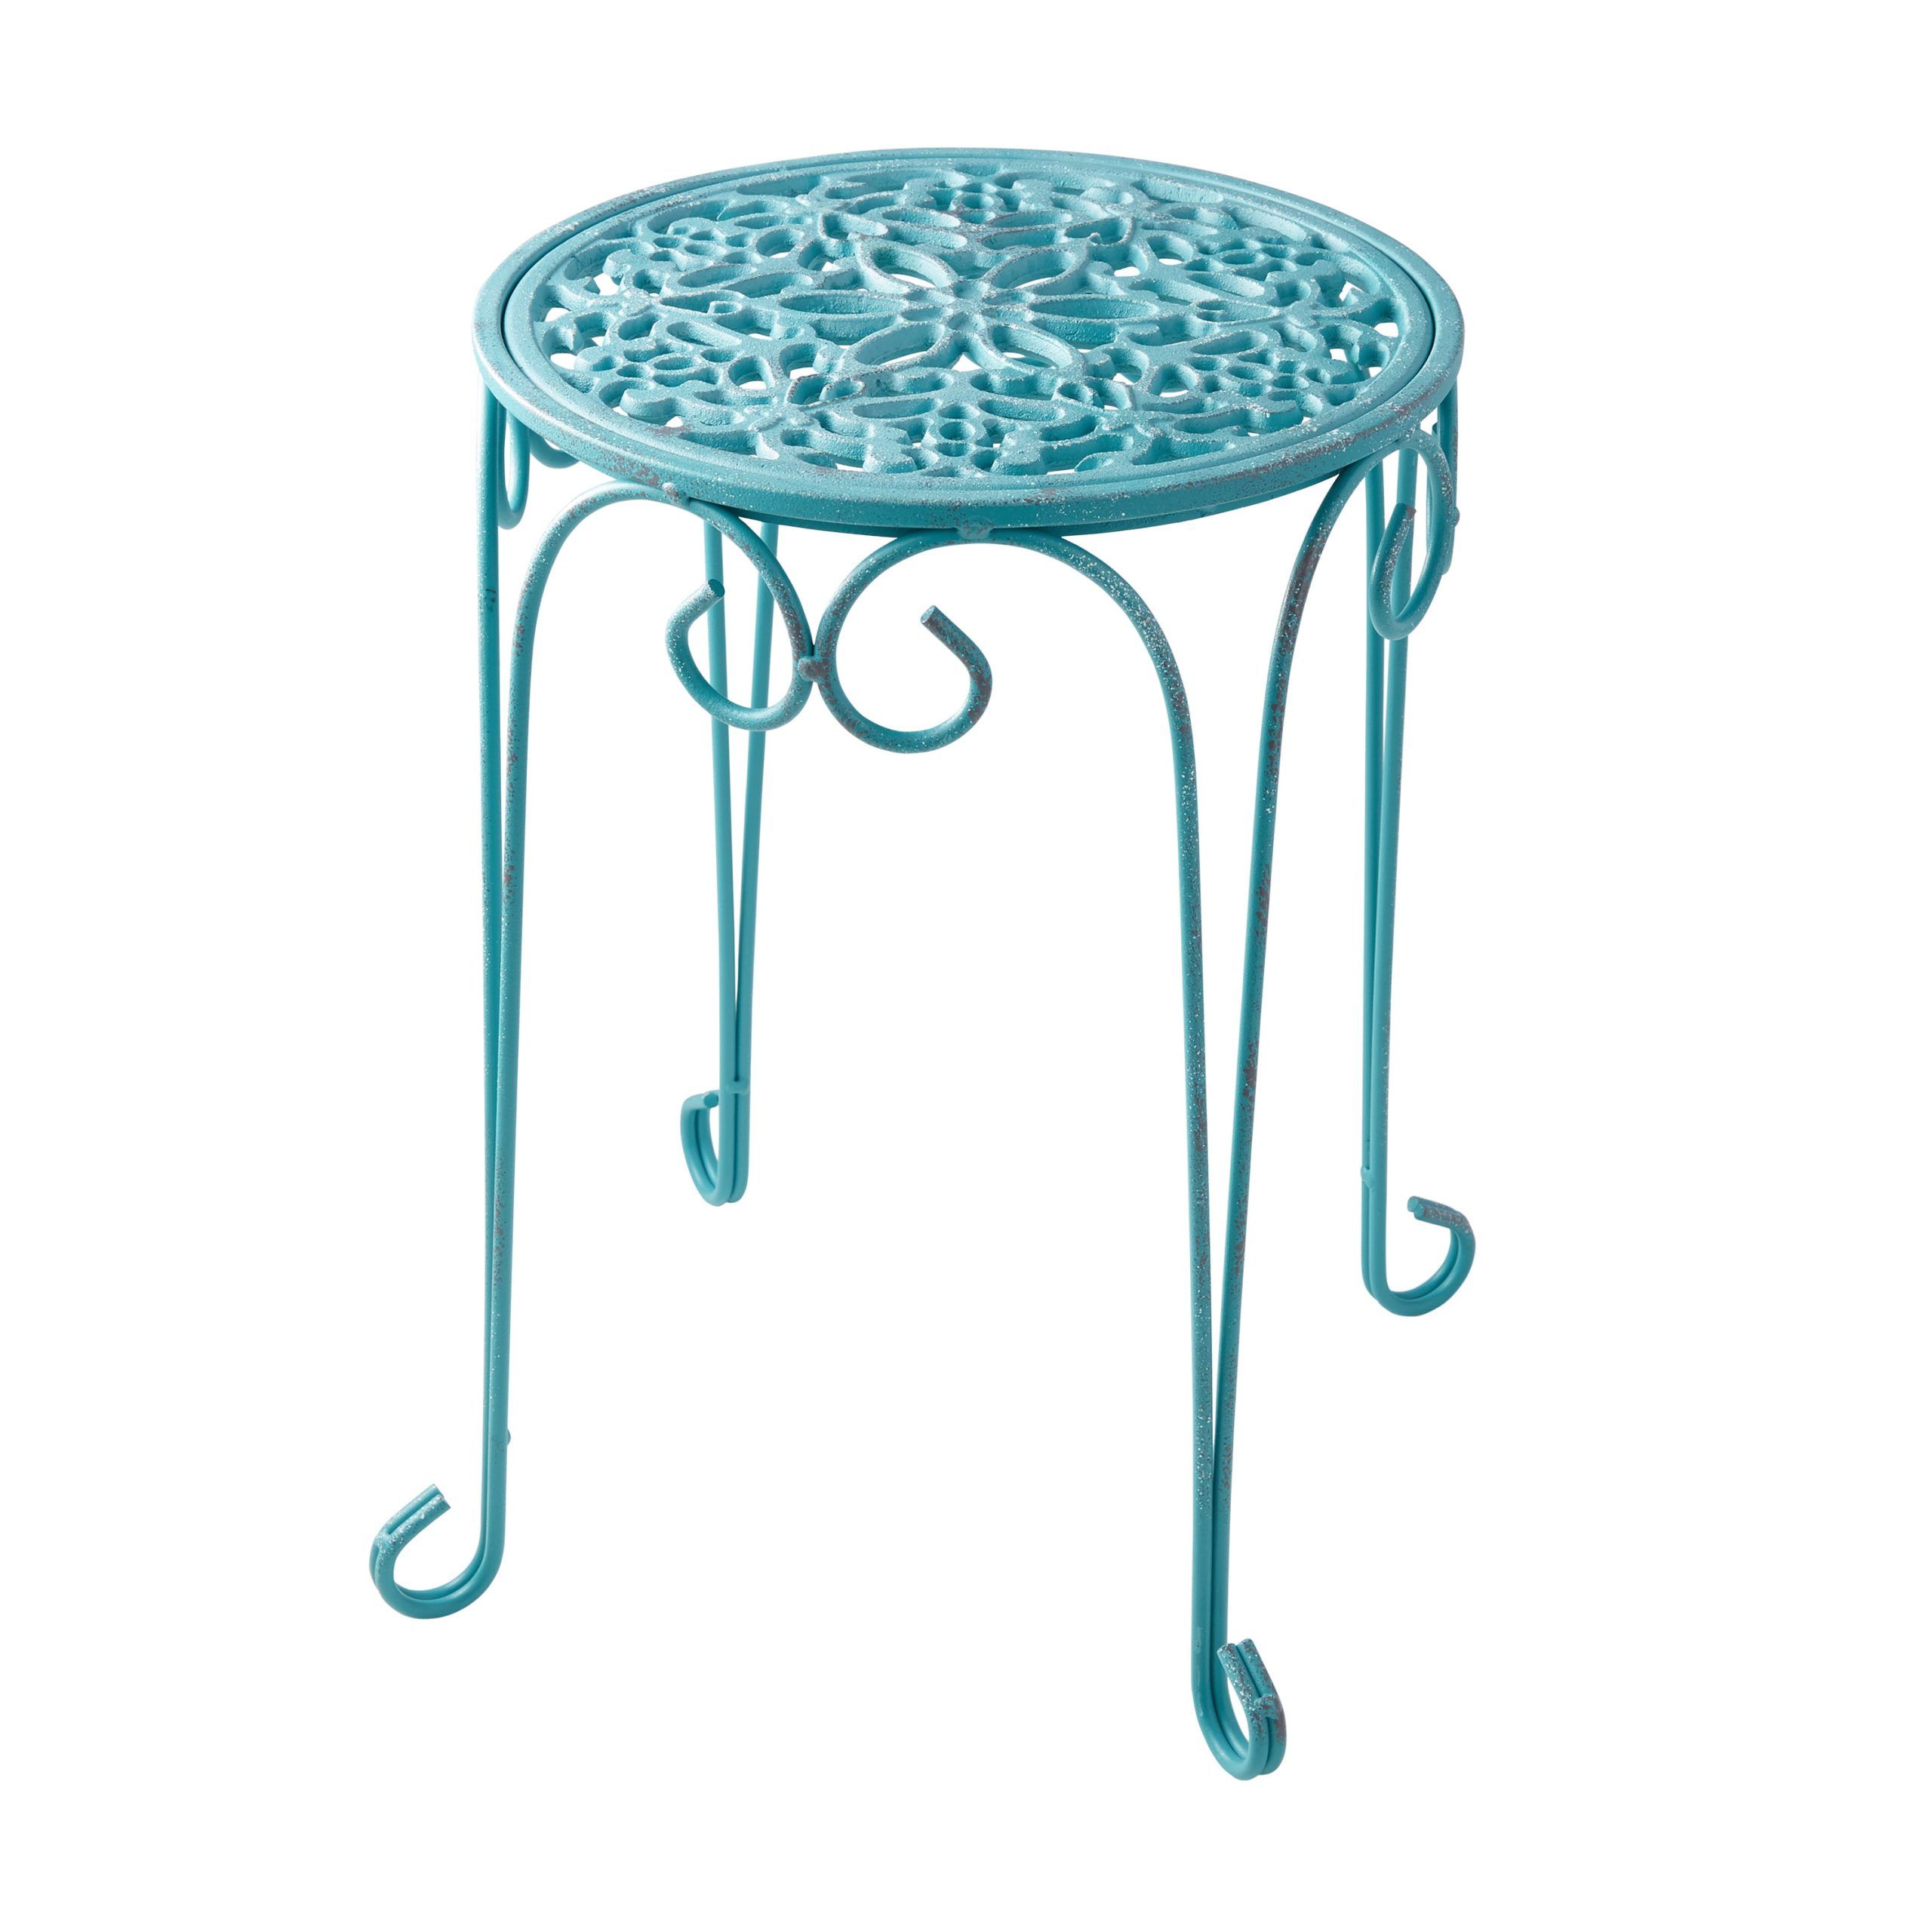 The Pioneer Woman 16" Cast Iron Plant Stand Teal Color With Distressed  Finish – Walmart In 16 Inch Plant Stands (View 5 of 15)